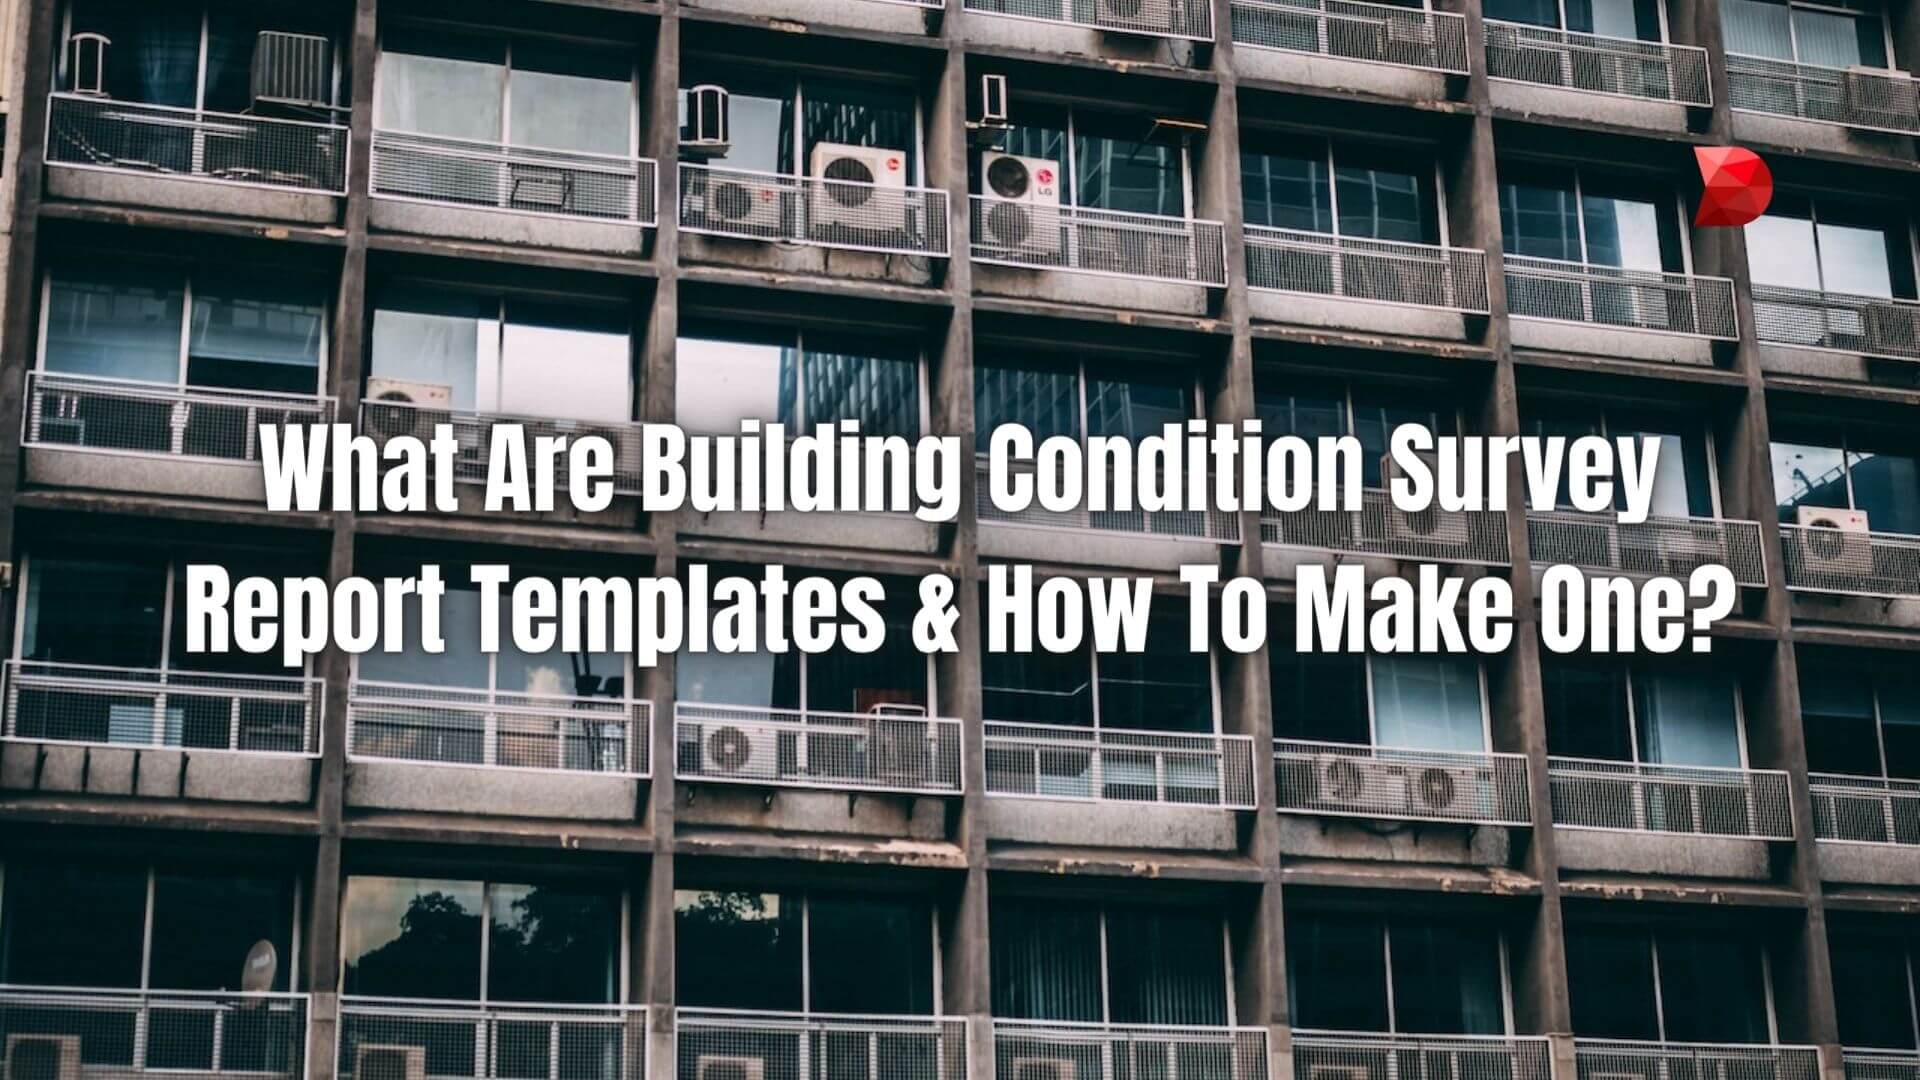 What Are Building Condition Survey Report Templates & How To Make One